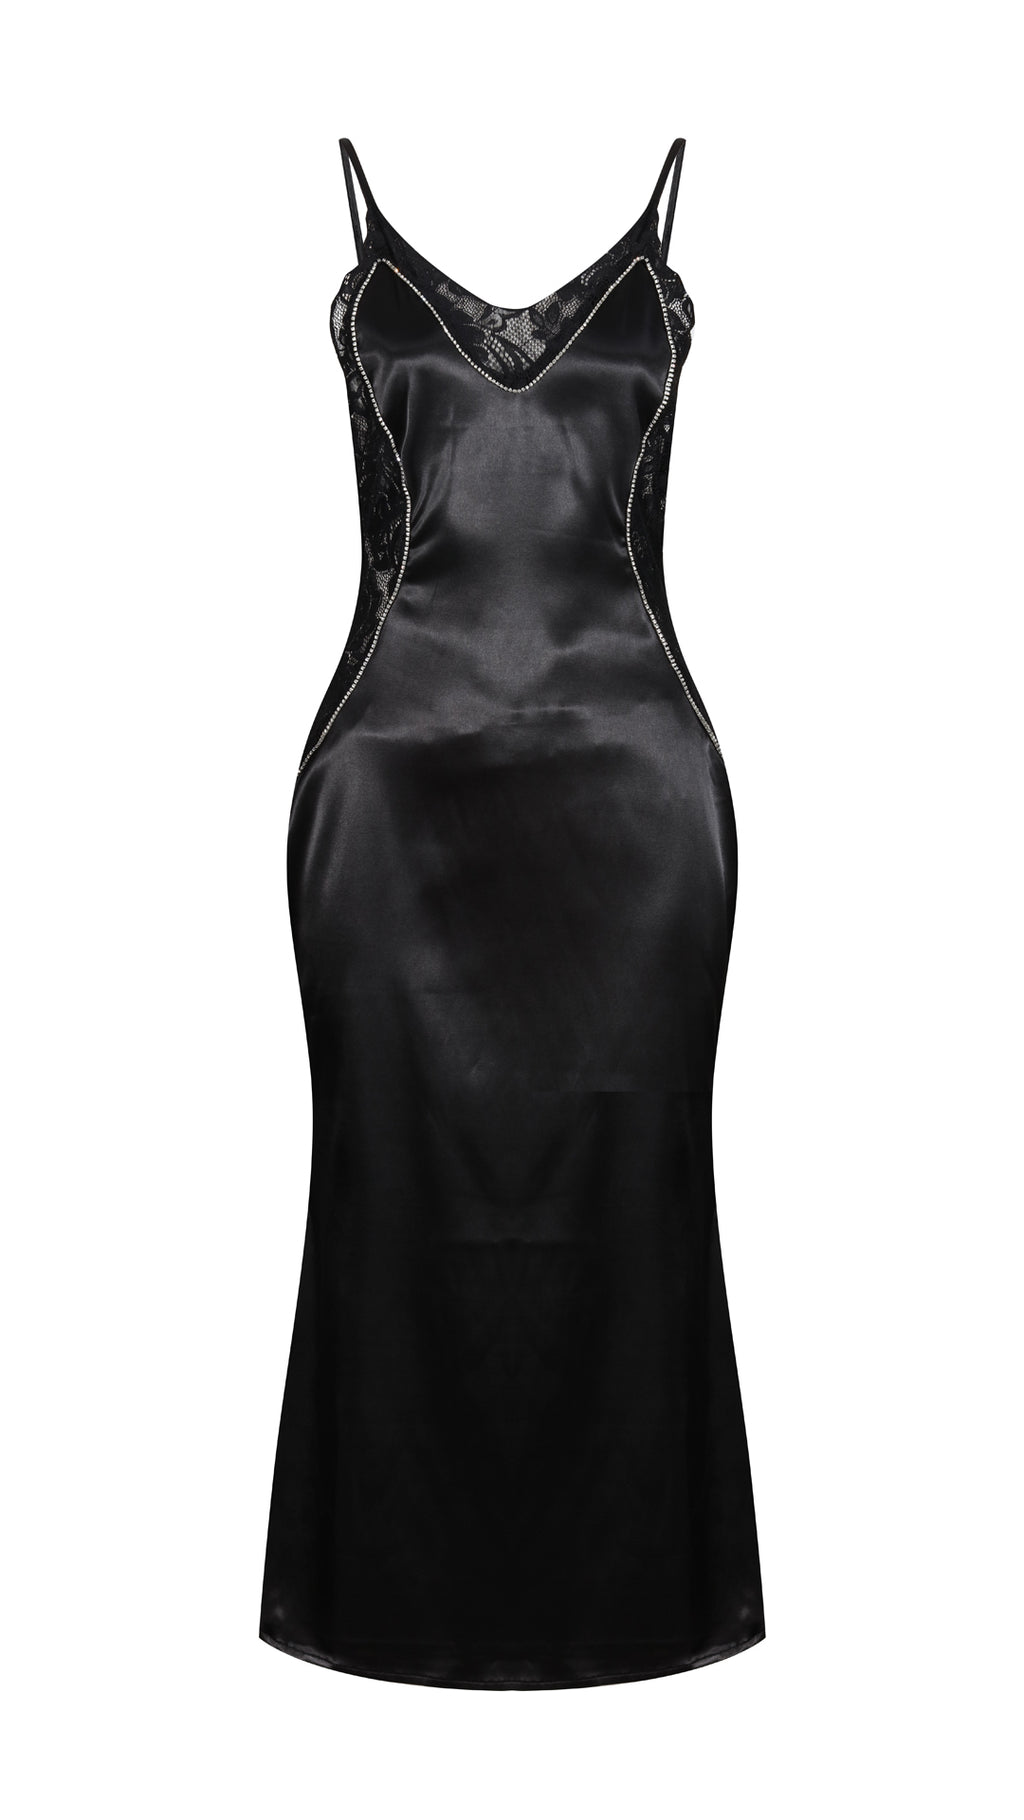 Scarfina Black Satin, Lace and Crystal Dress